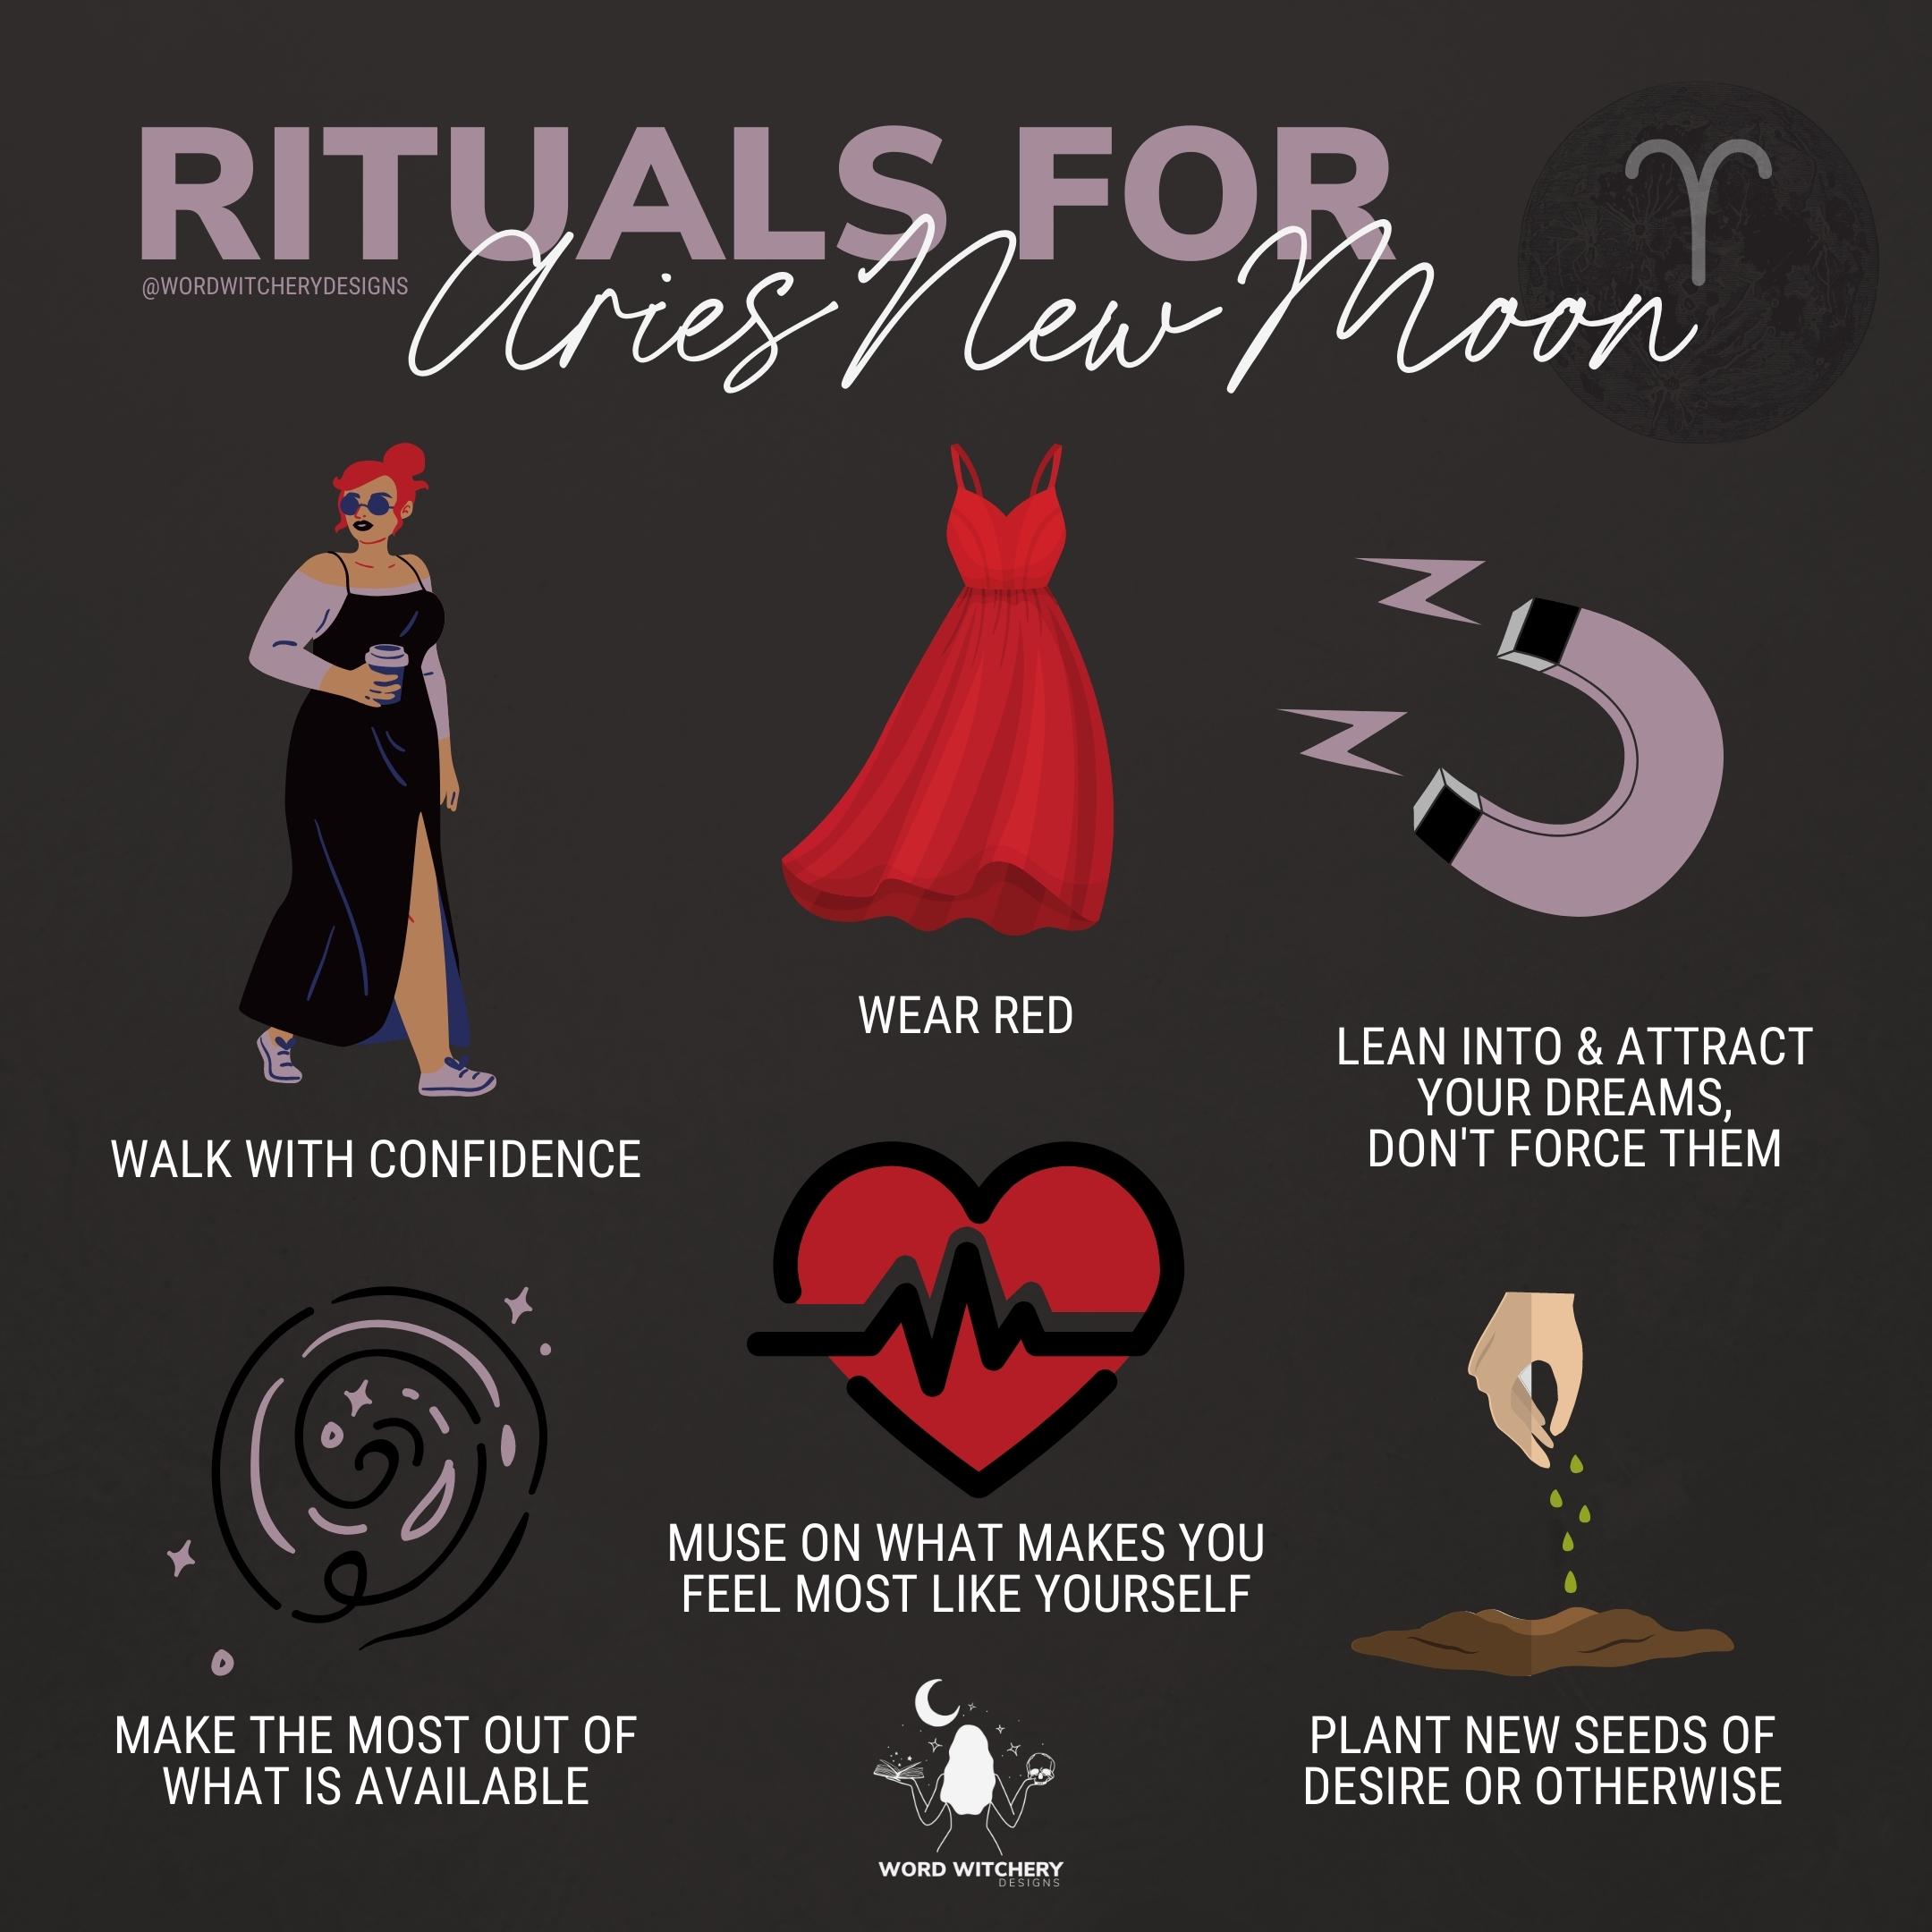 SelfCare Rituals for the Aries New Moon Word Witchery Designs